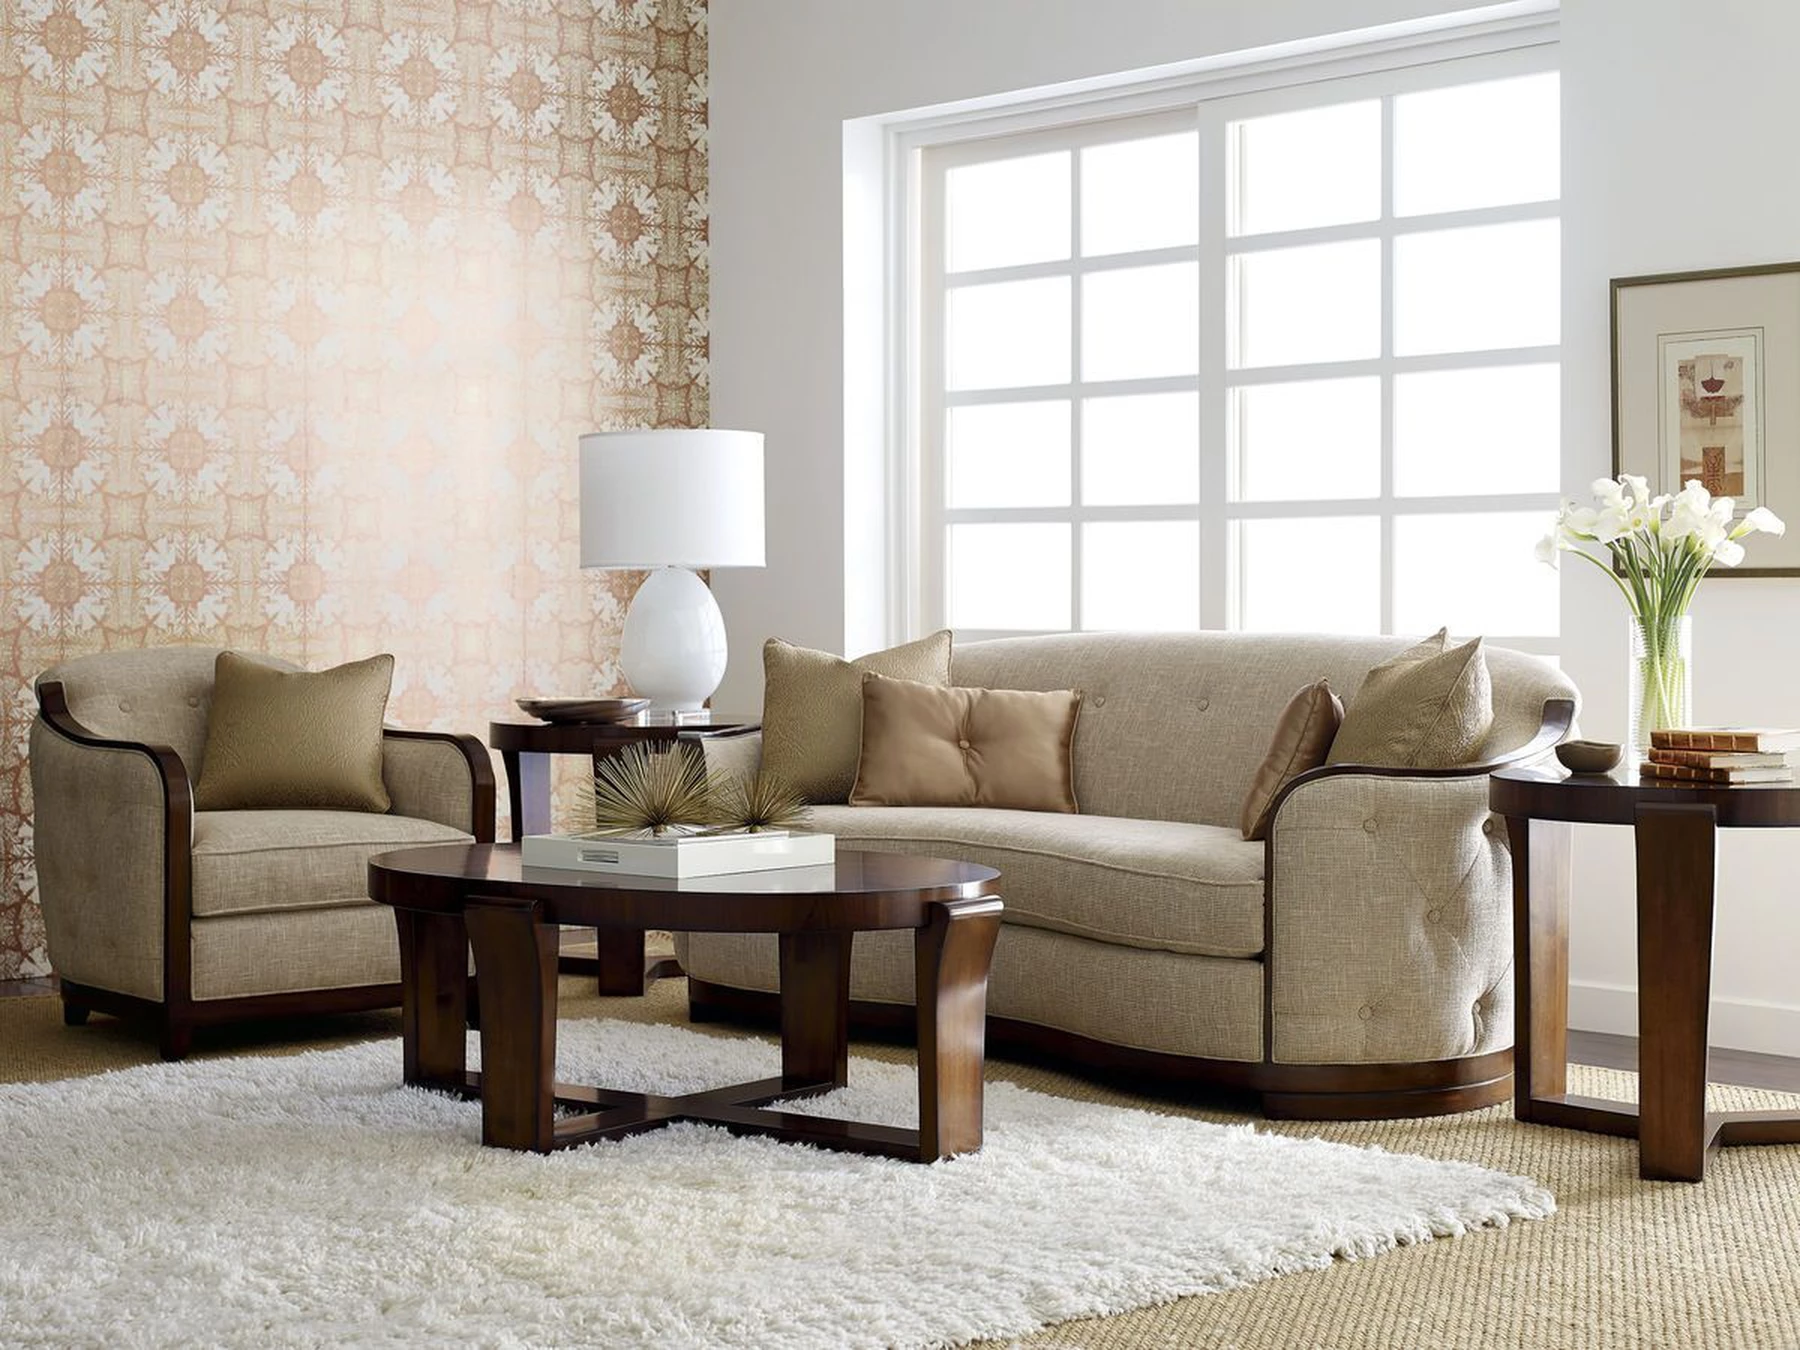 Grayson Living Accent Chair Collection